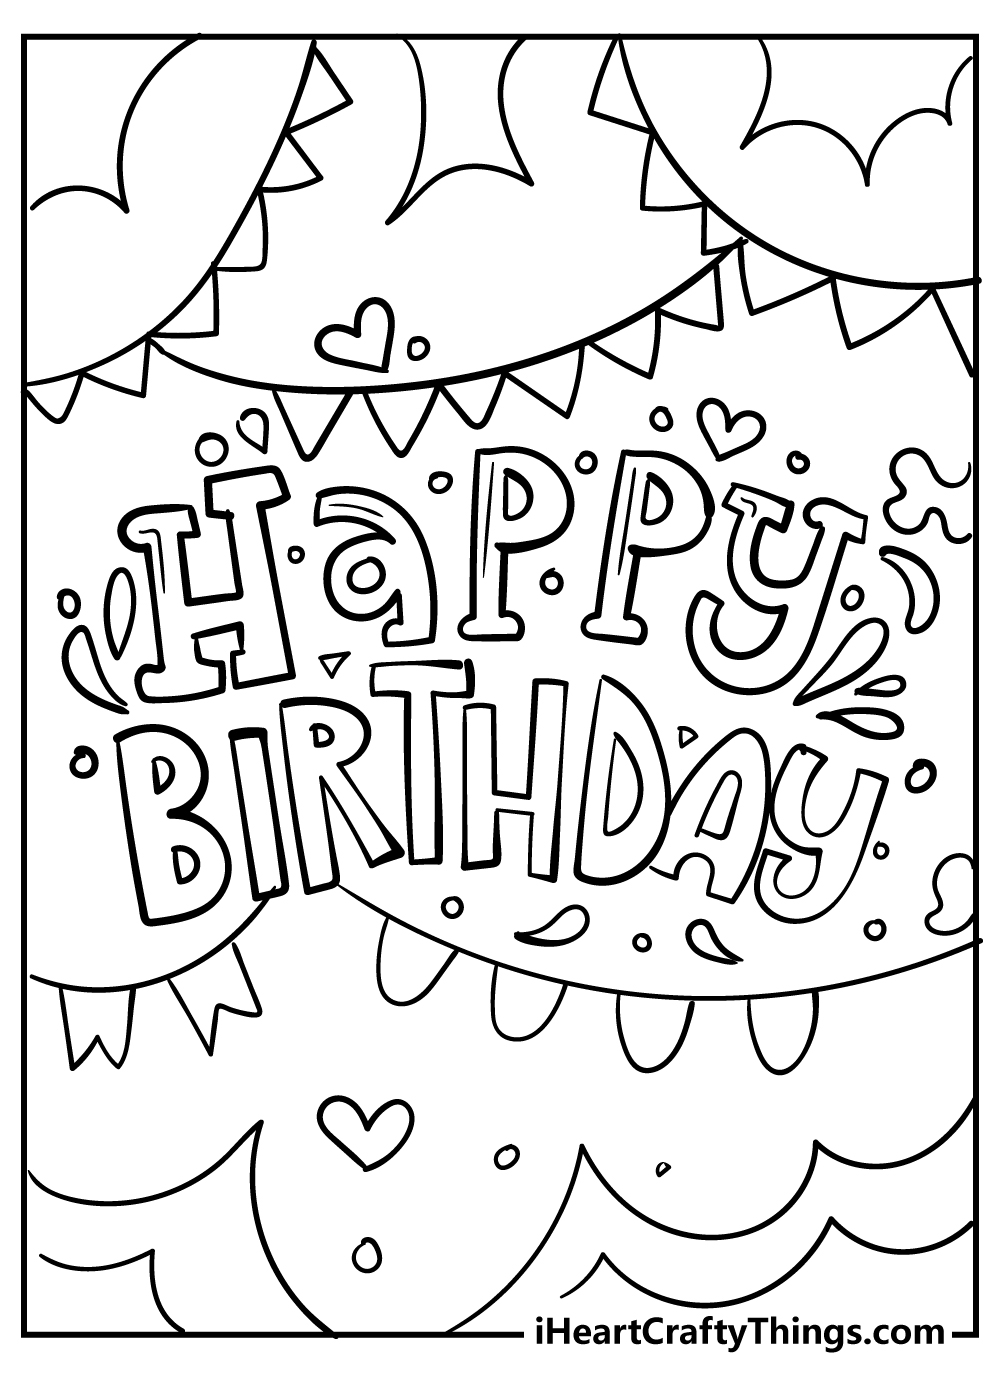 Happy Birthday coloring pages free printable